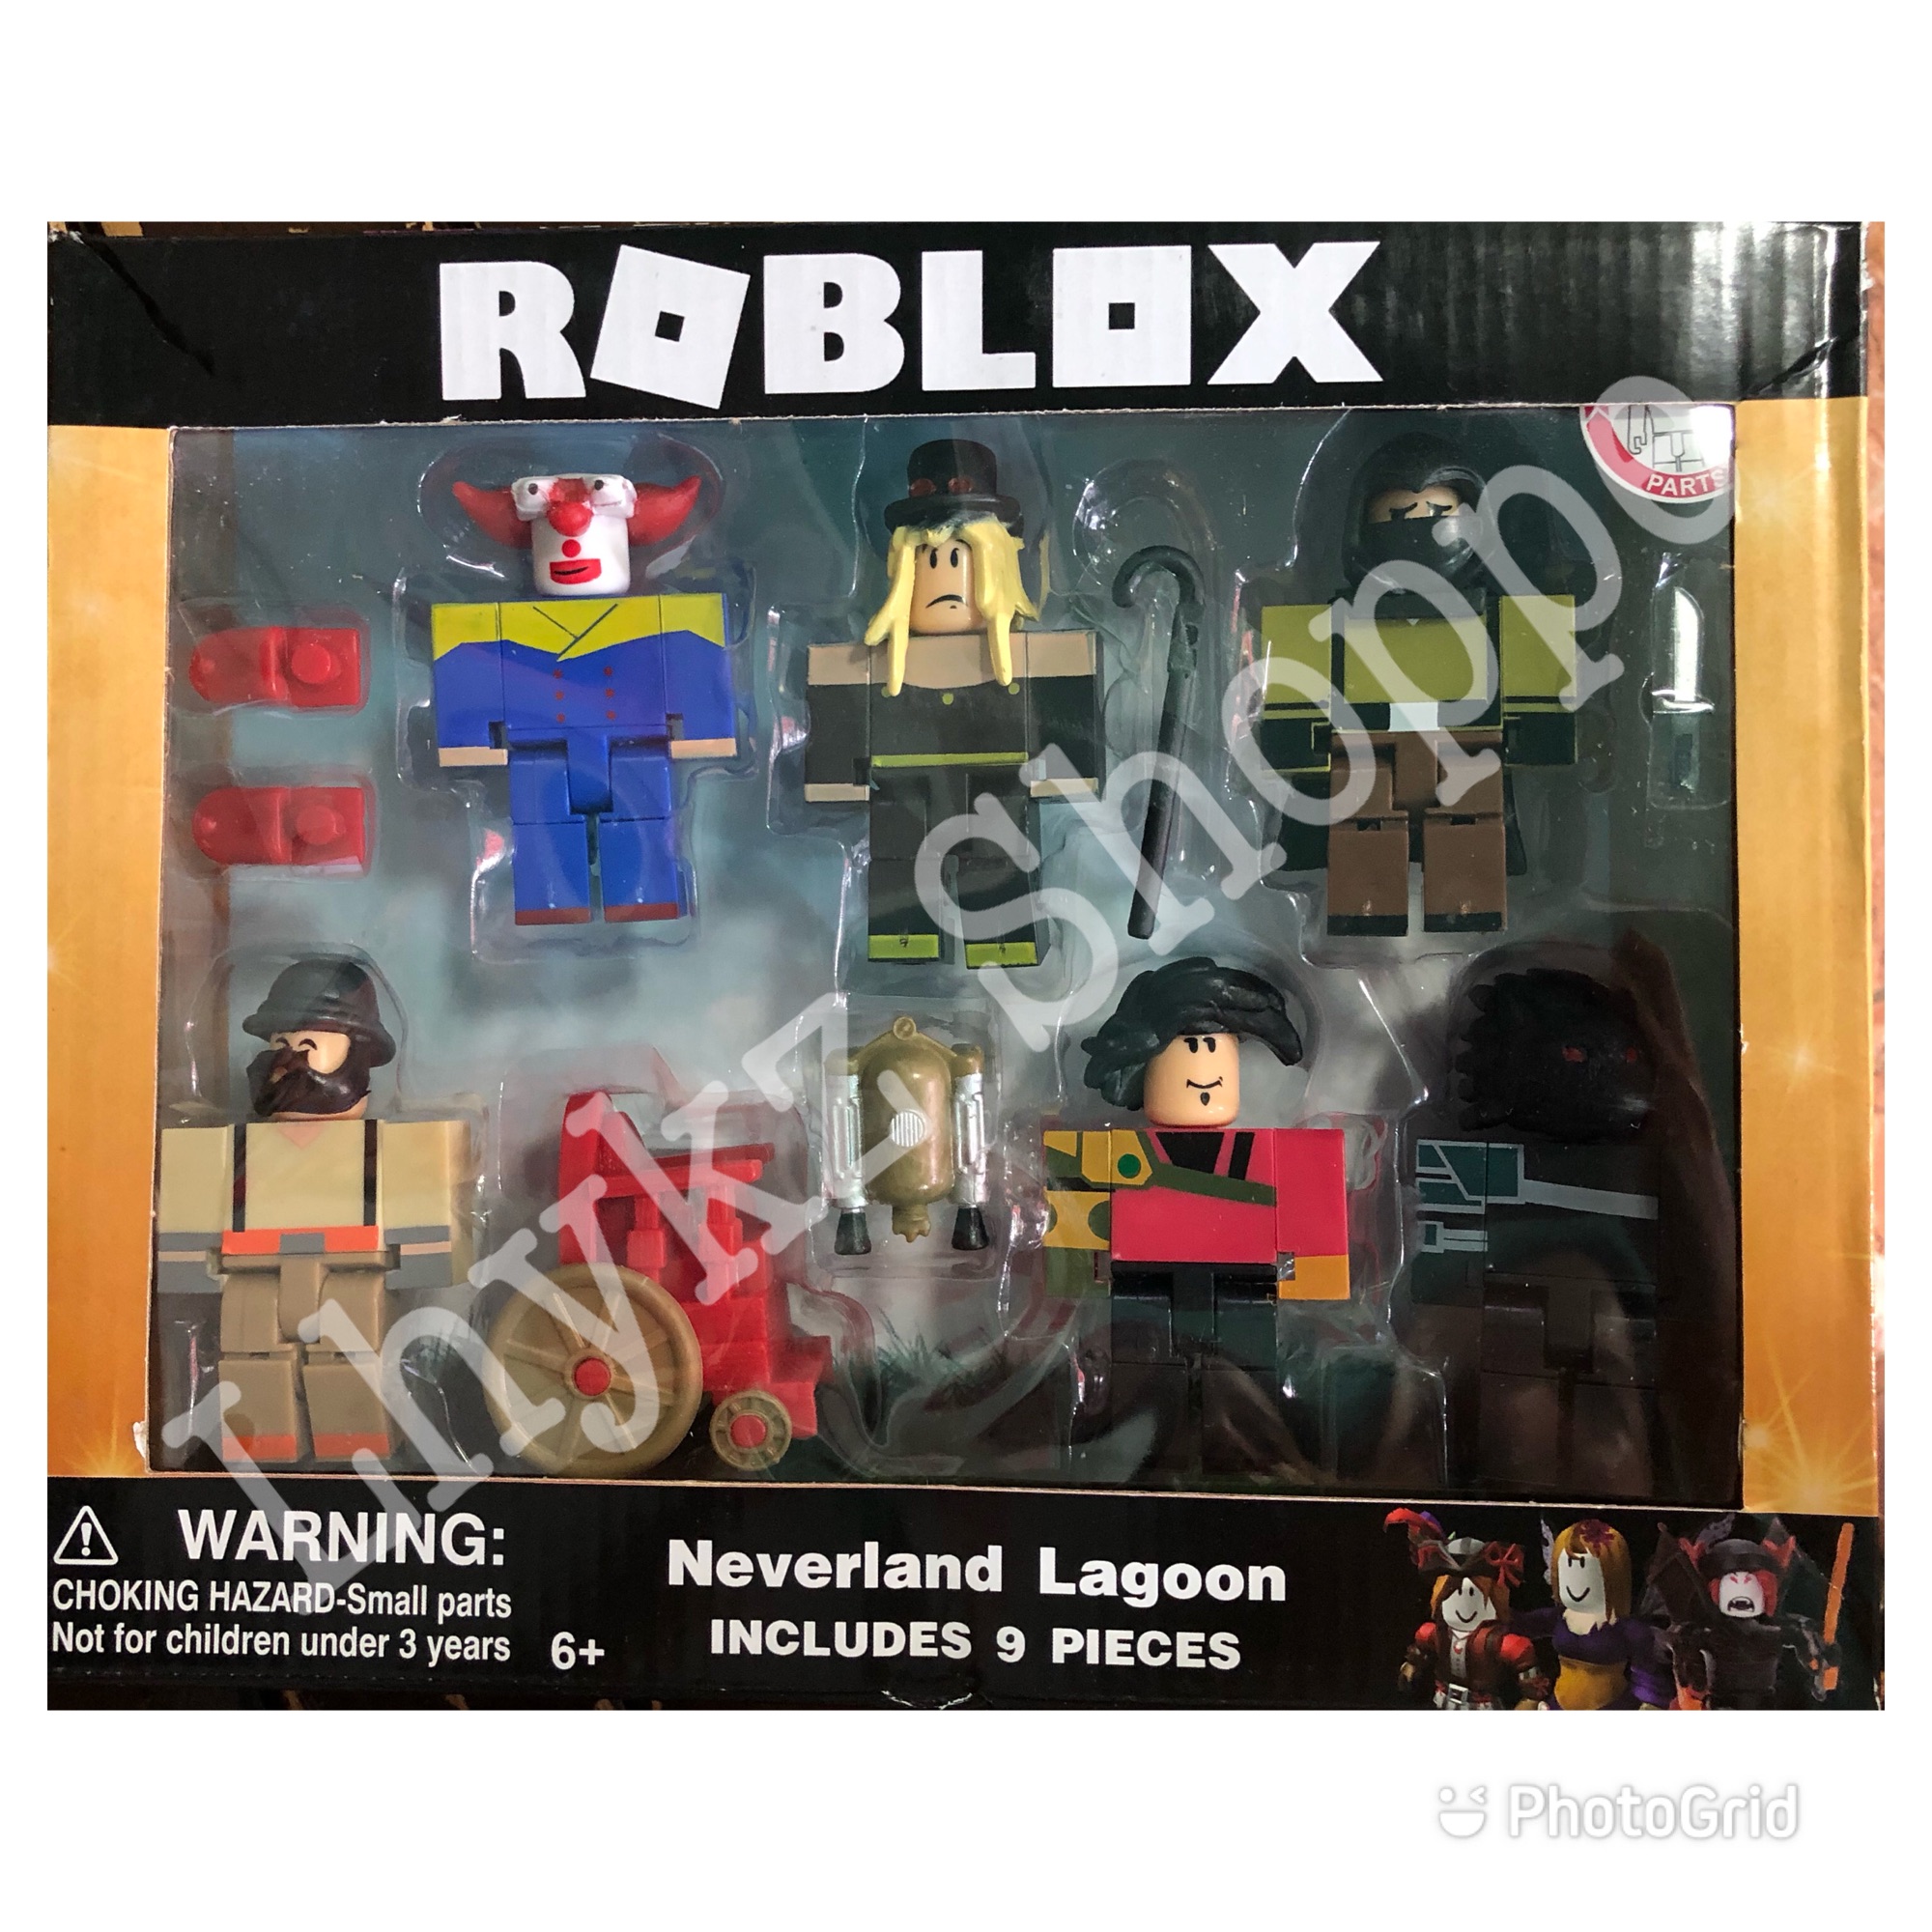 Roblox 5pcs Toys For Kids Buy Sell Online Action Figures With Cheap Price Lazada Ph - roblox toys lazada